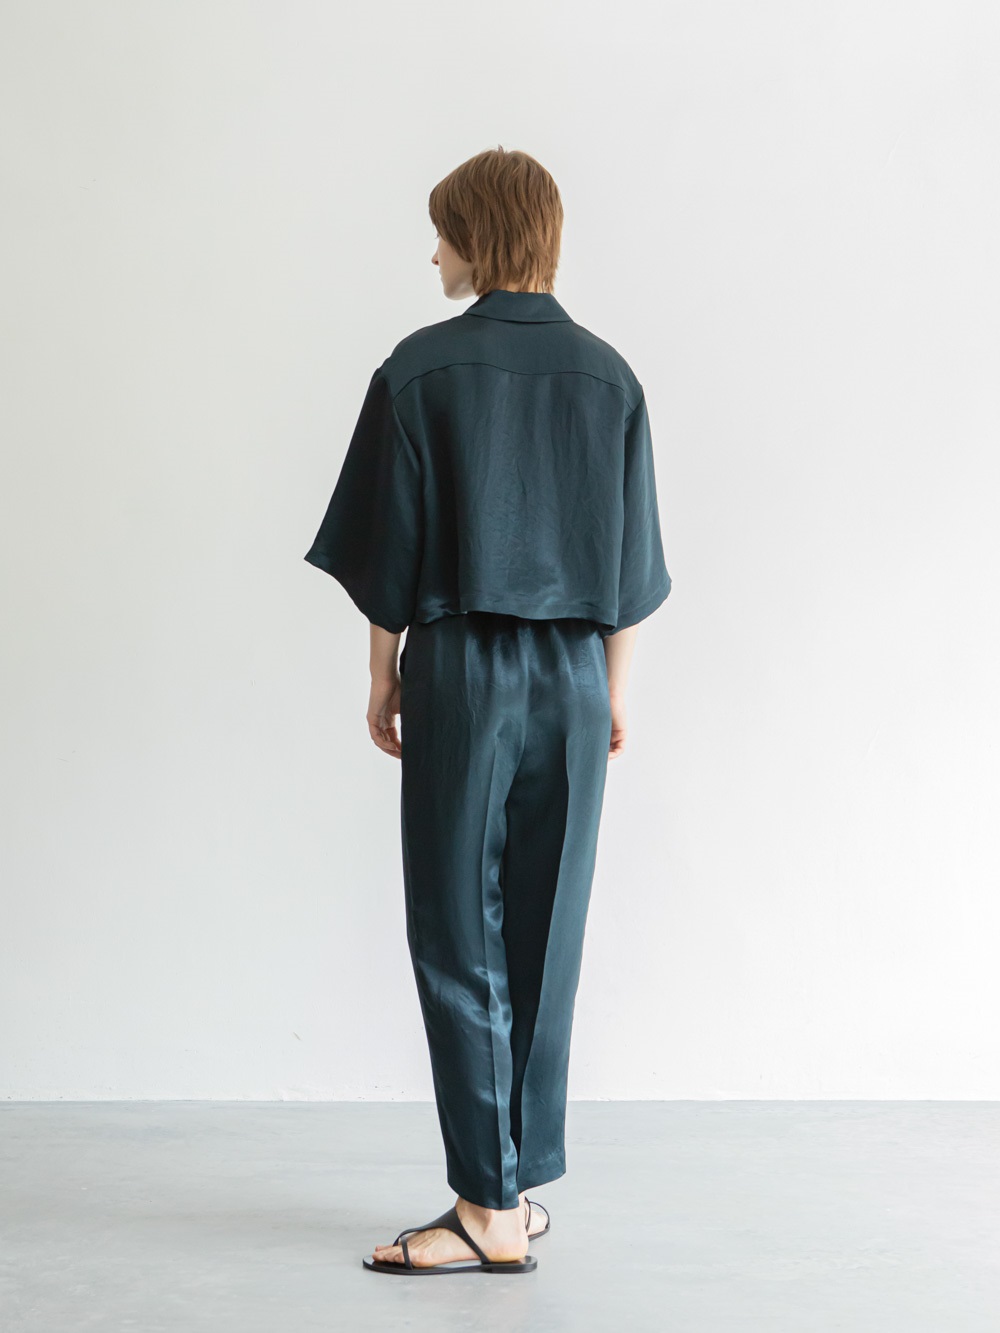 Satin Easy Pants | Bottoms | Enchainement Online Store